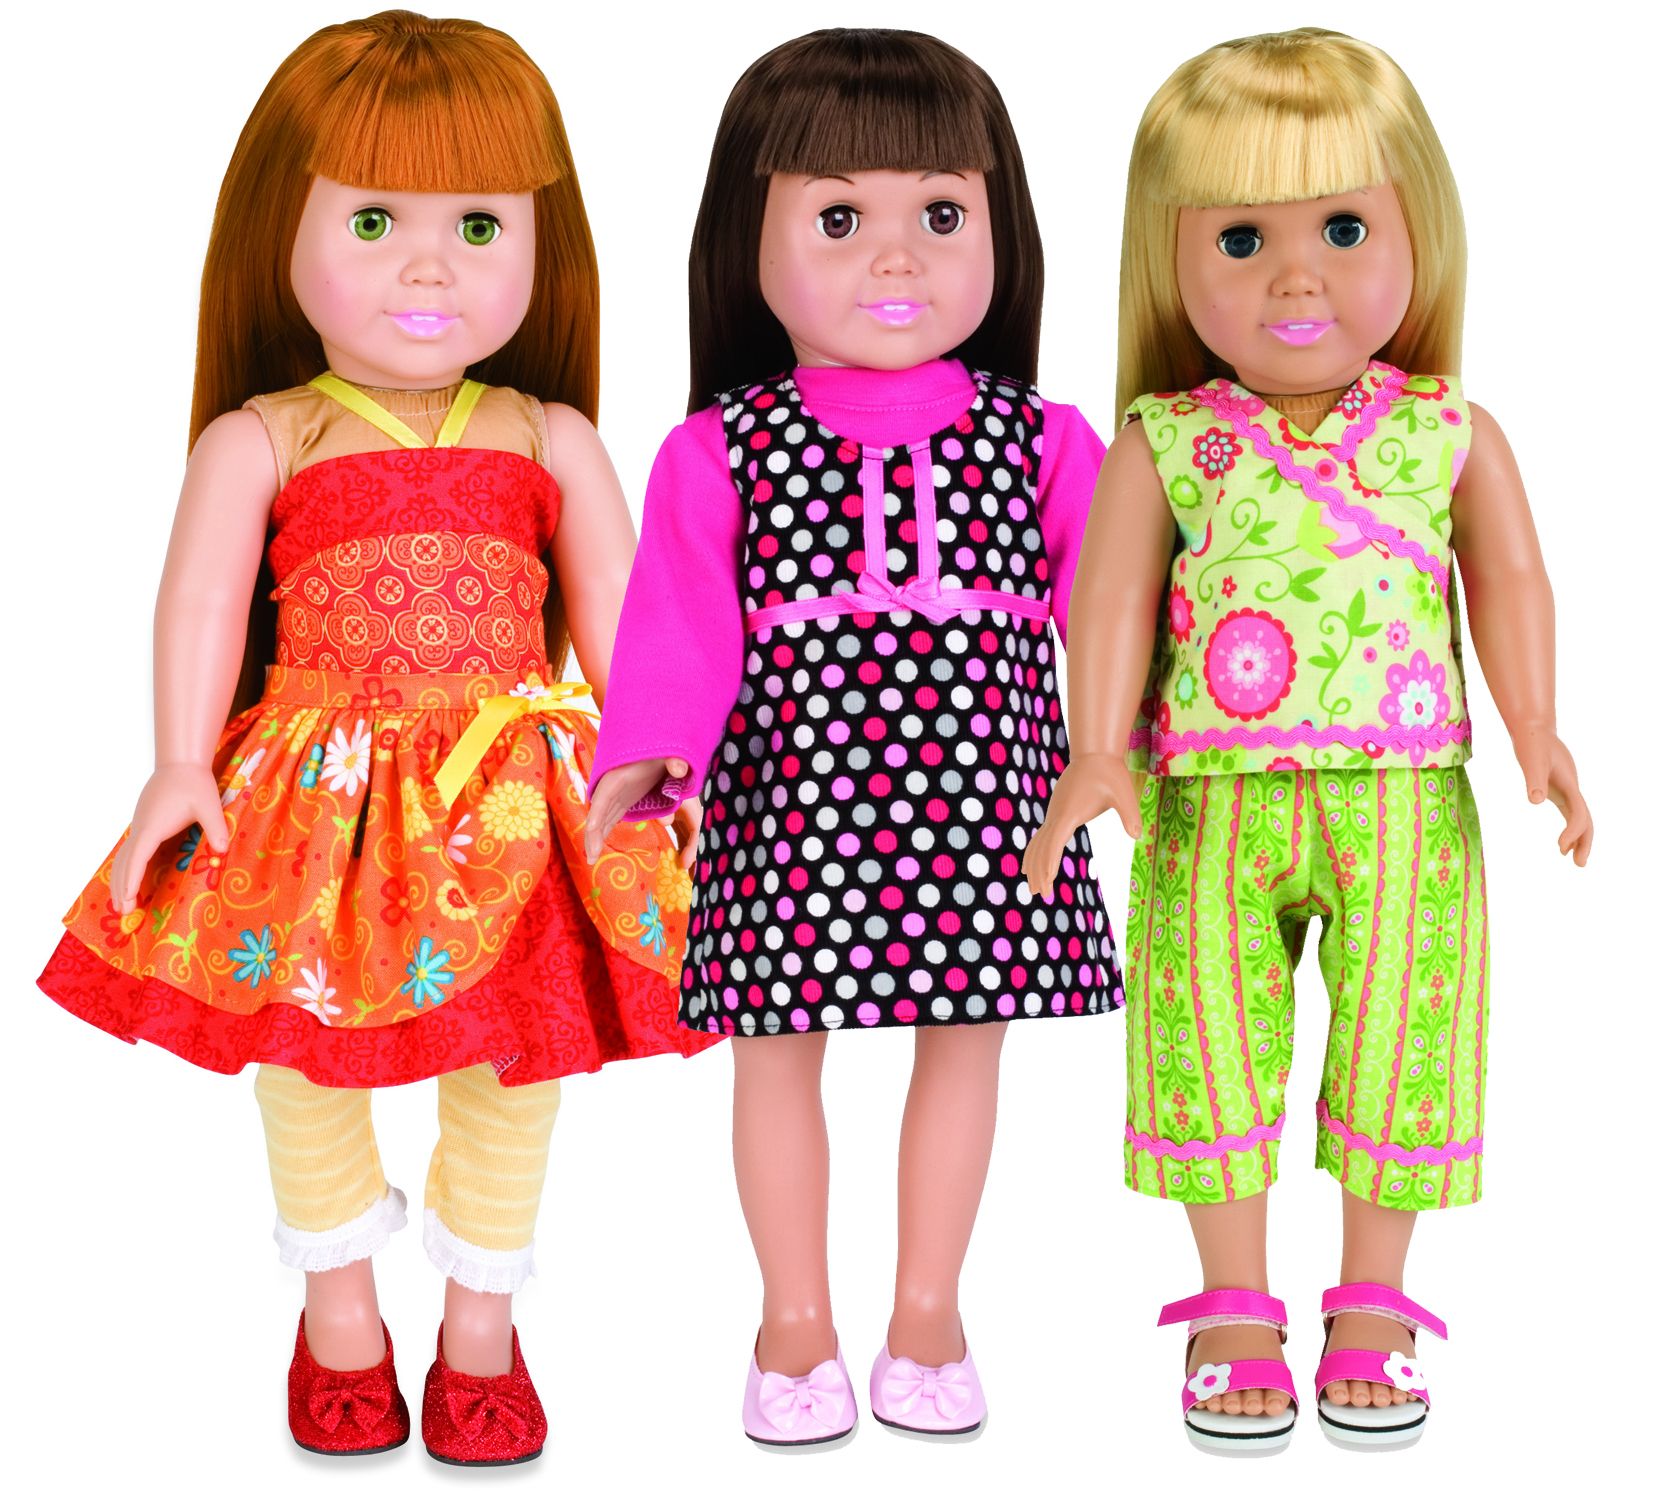 have an american girl freedec doll now youfree american girl - have an american girl freedec doll now youfree american girl -   American Girl Patterns